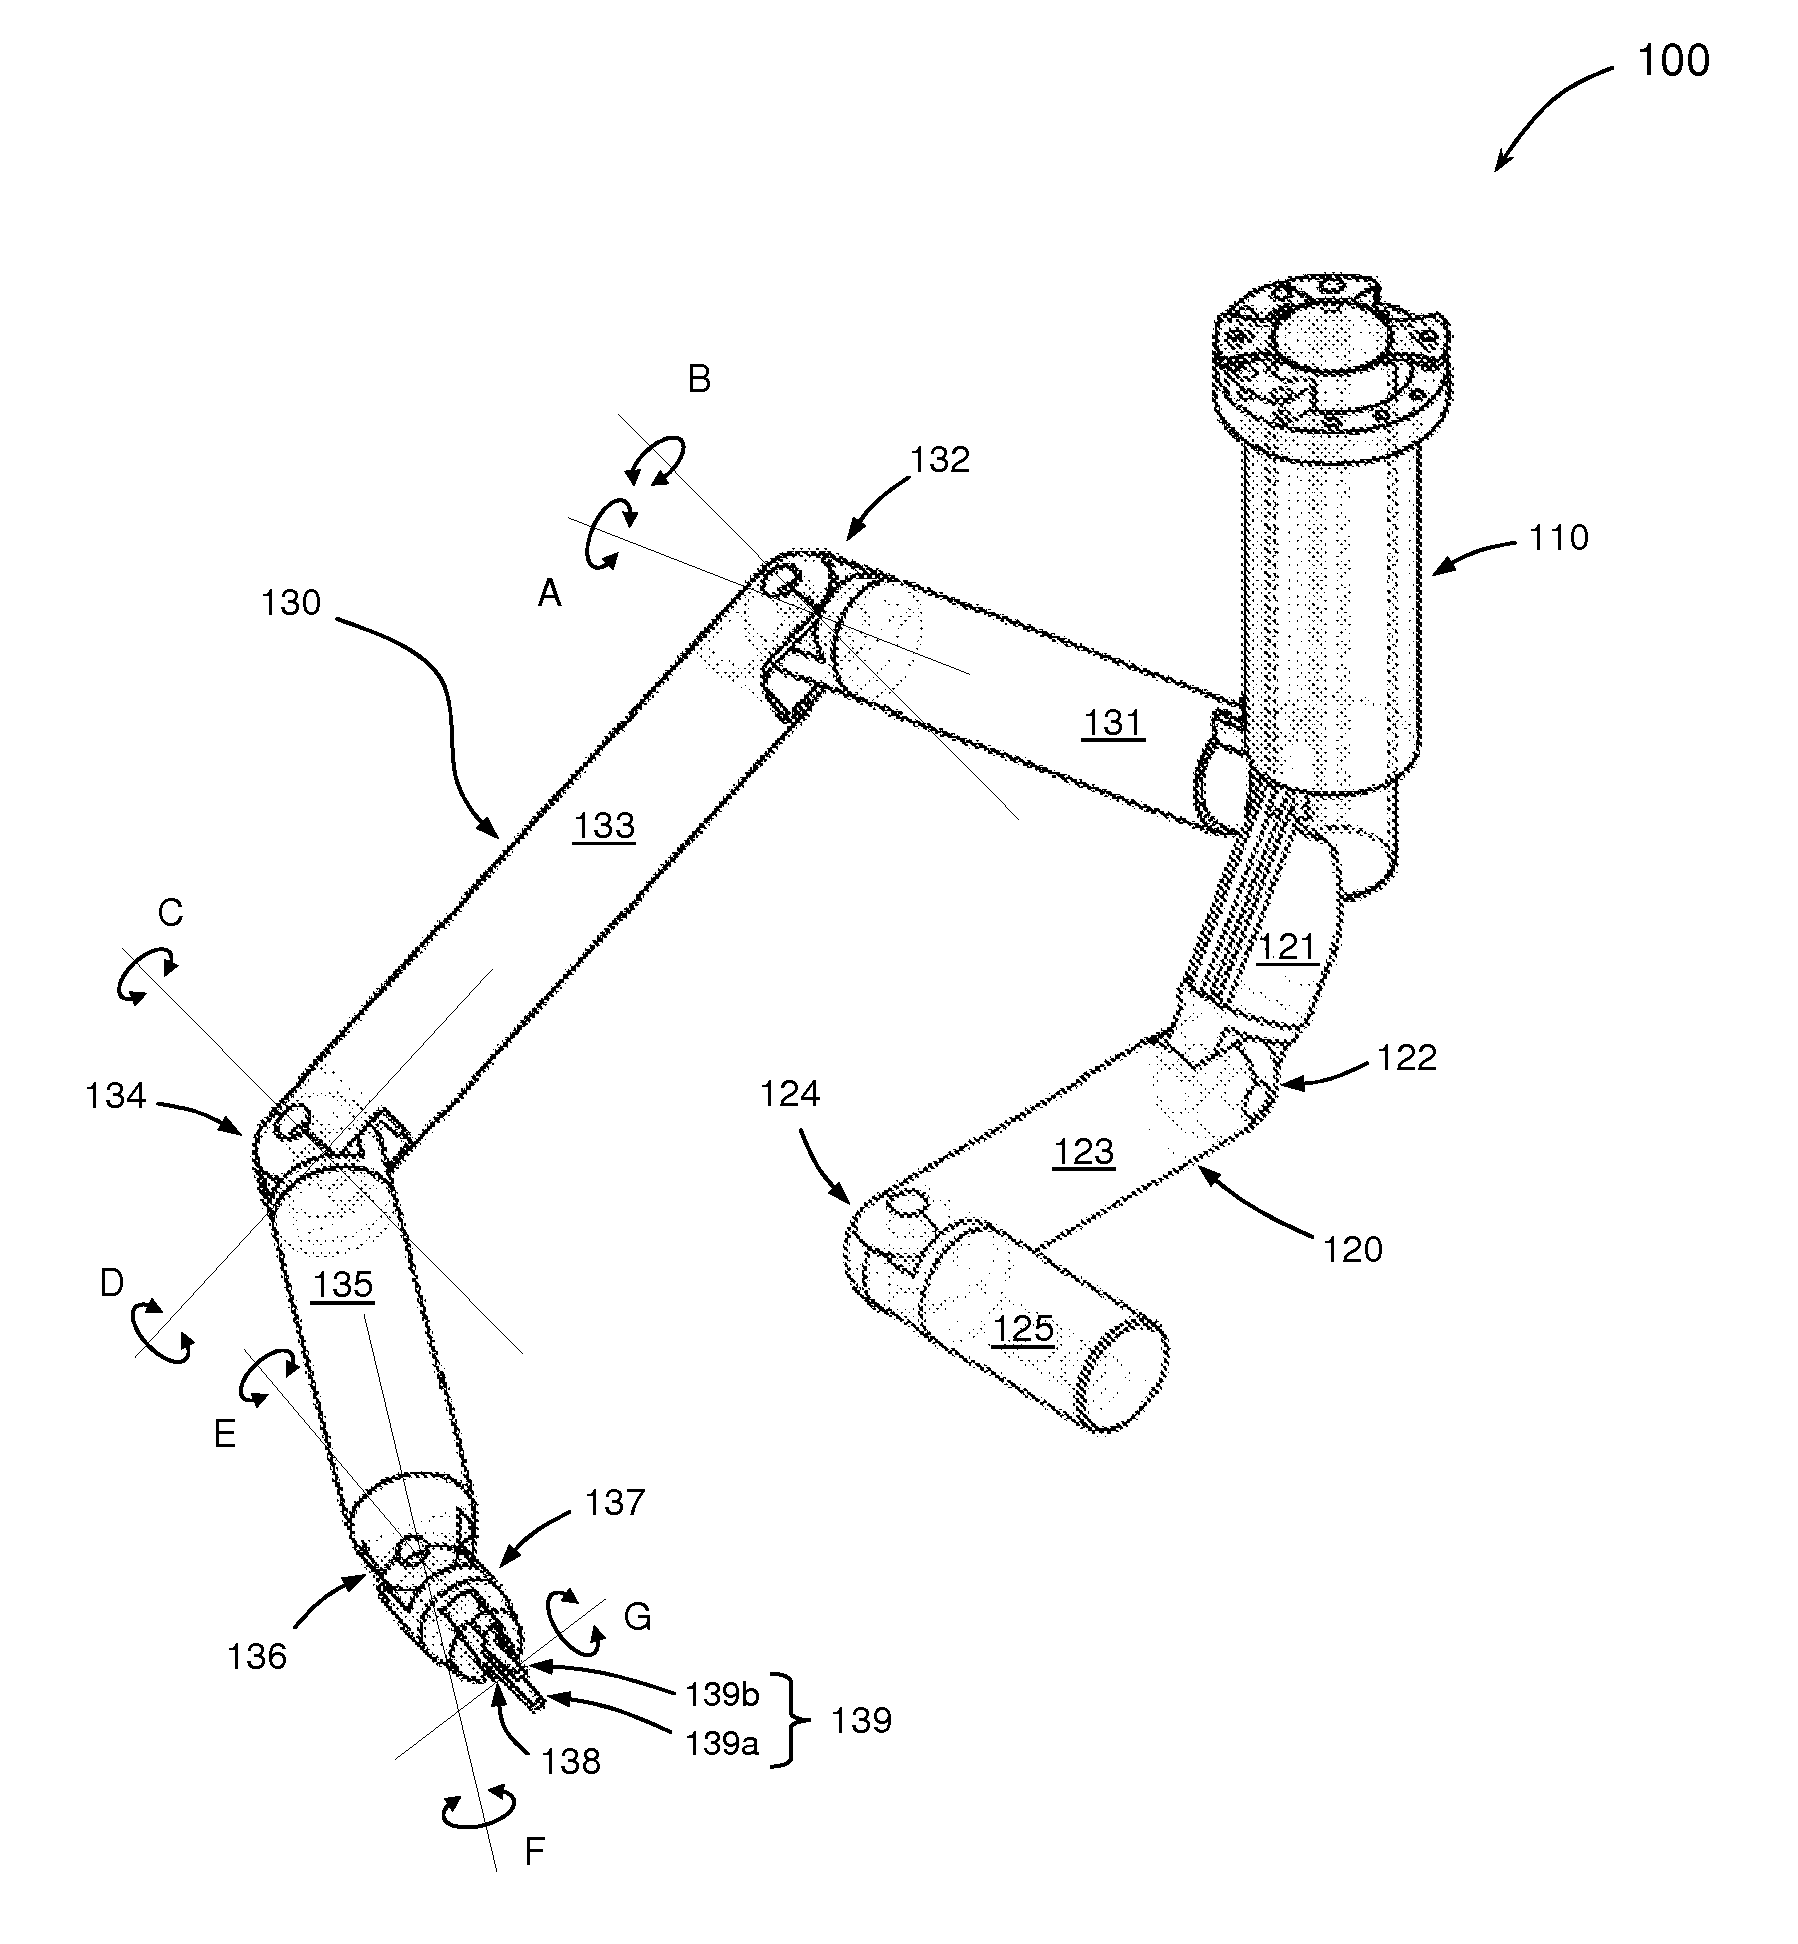 Single access surgical robotic devices and systems, and methods of configuring single access surgical robotic devices and systems